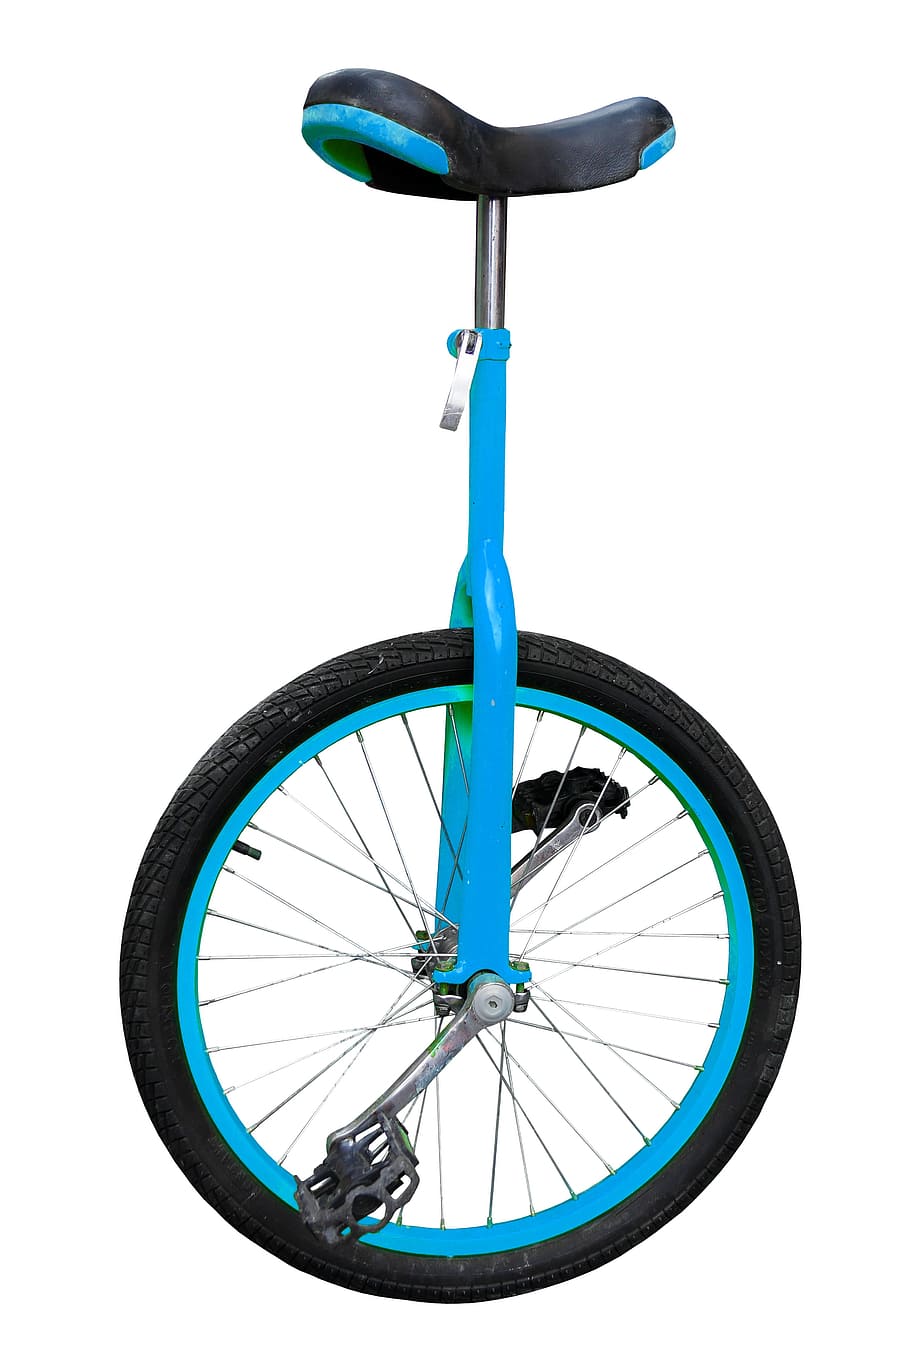 sport, bike, unicycle, saddle, pedals, mature, isolated, cycling, bicycle, land vehicle